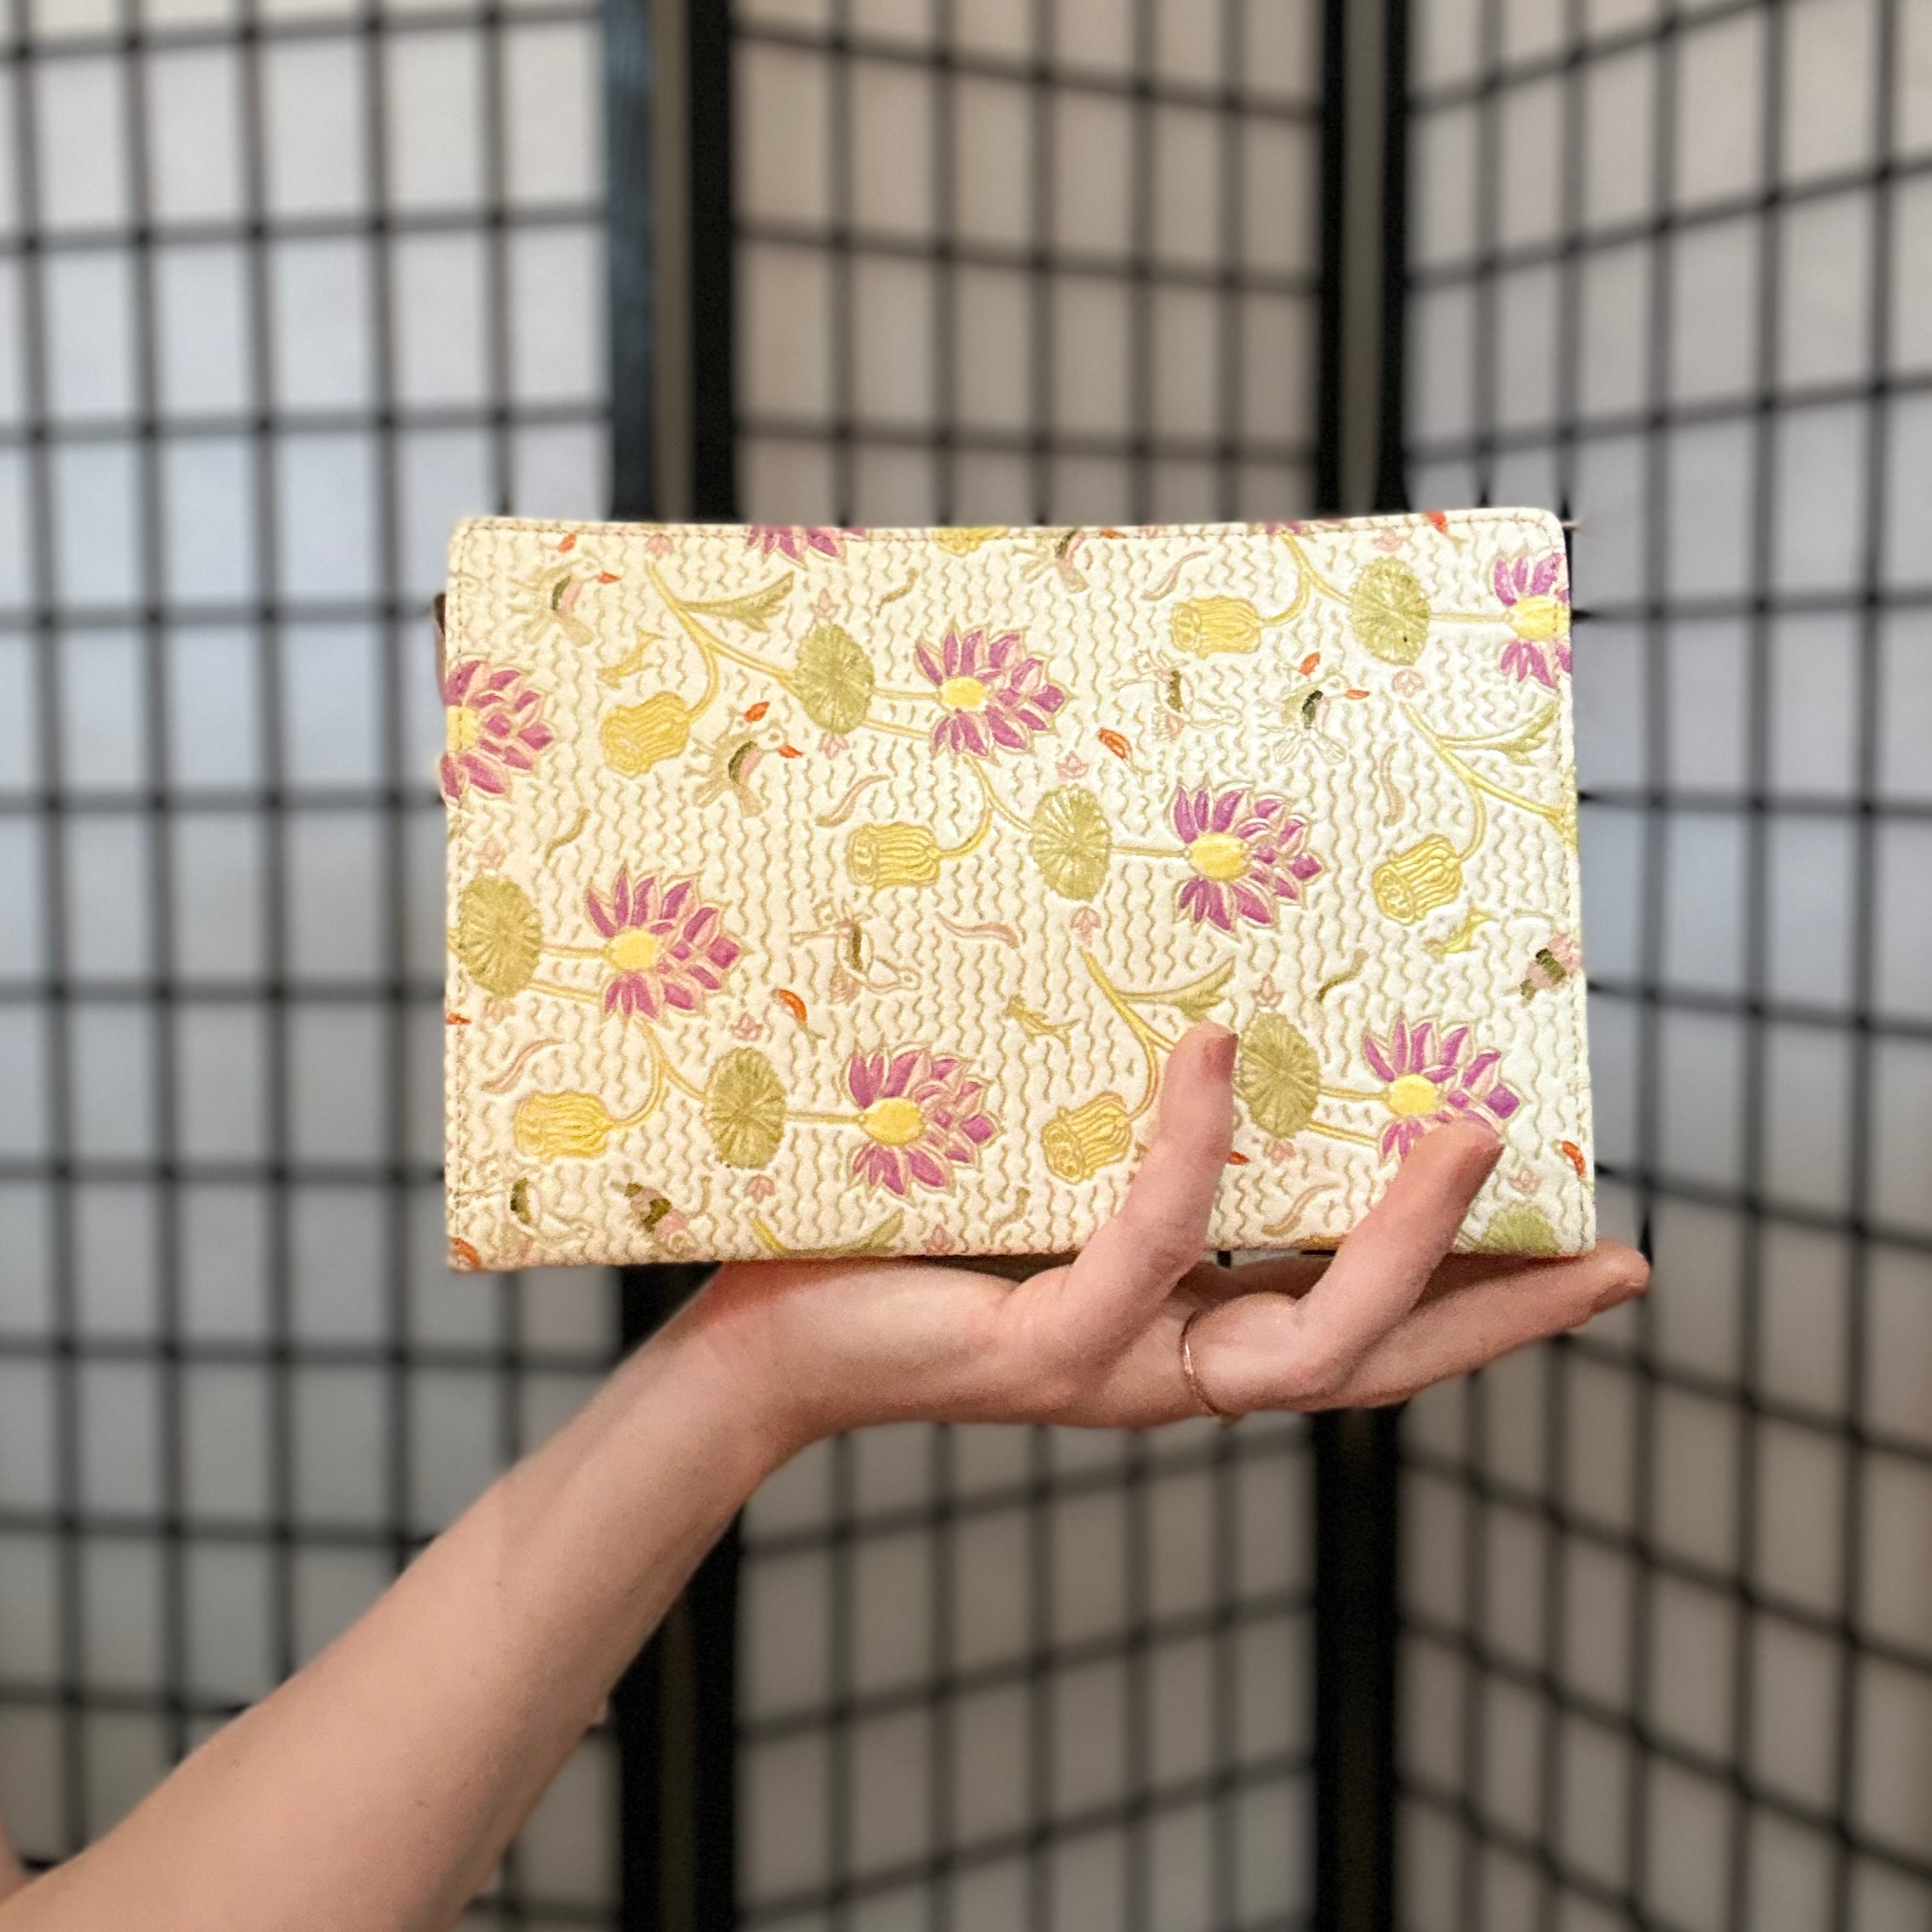 Handpainted Floral Clutch for Weddings